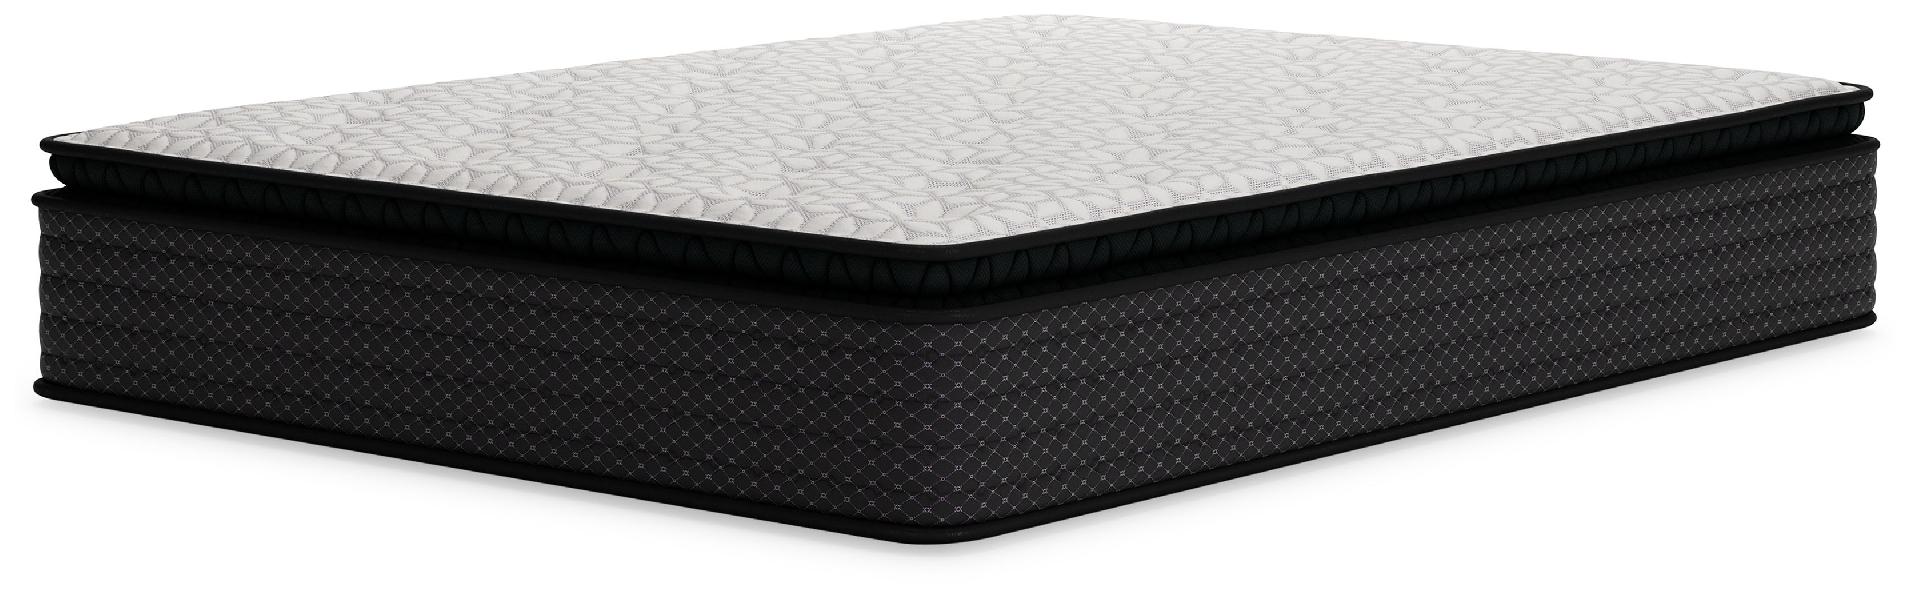 Image of Limited Edition Pt - White - King Mattress